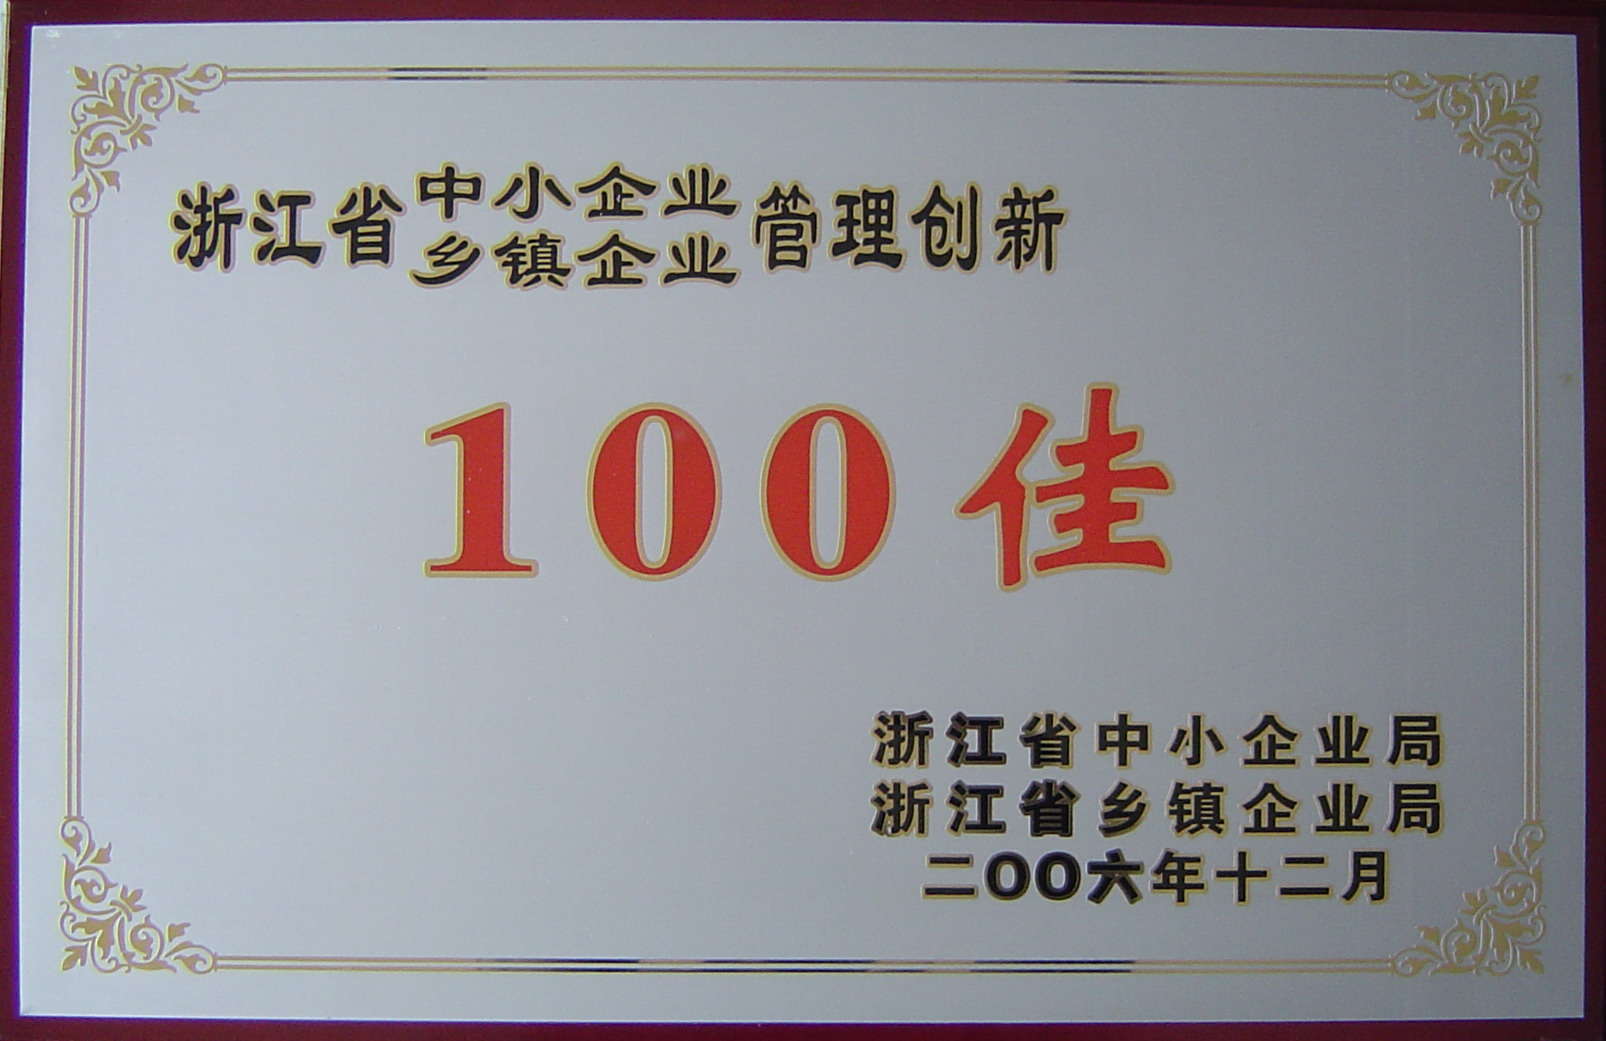 Management innovation top100 of minor and township enterprise of Zhejiang province